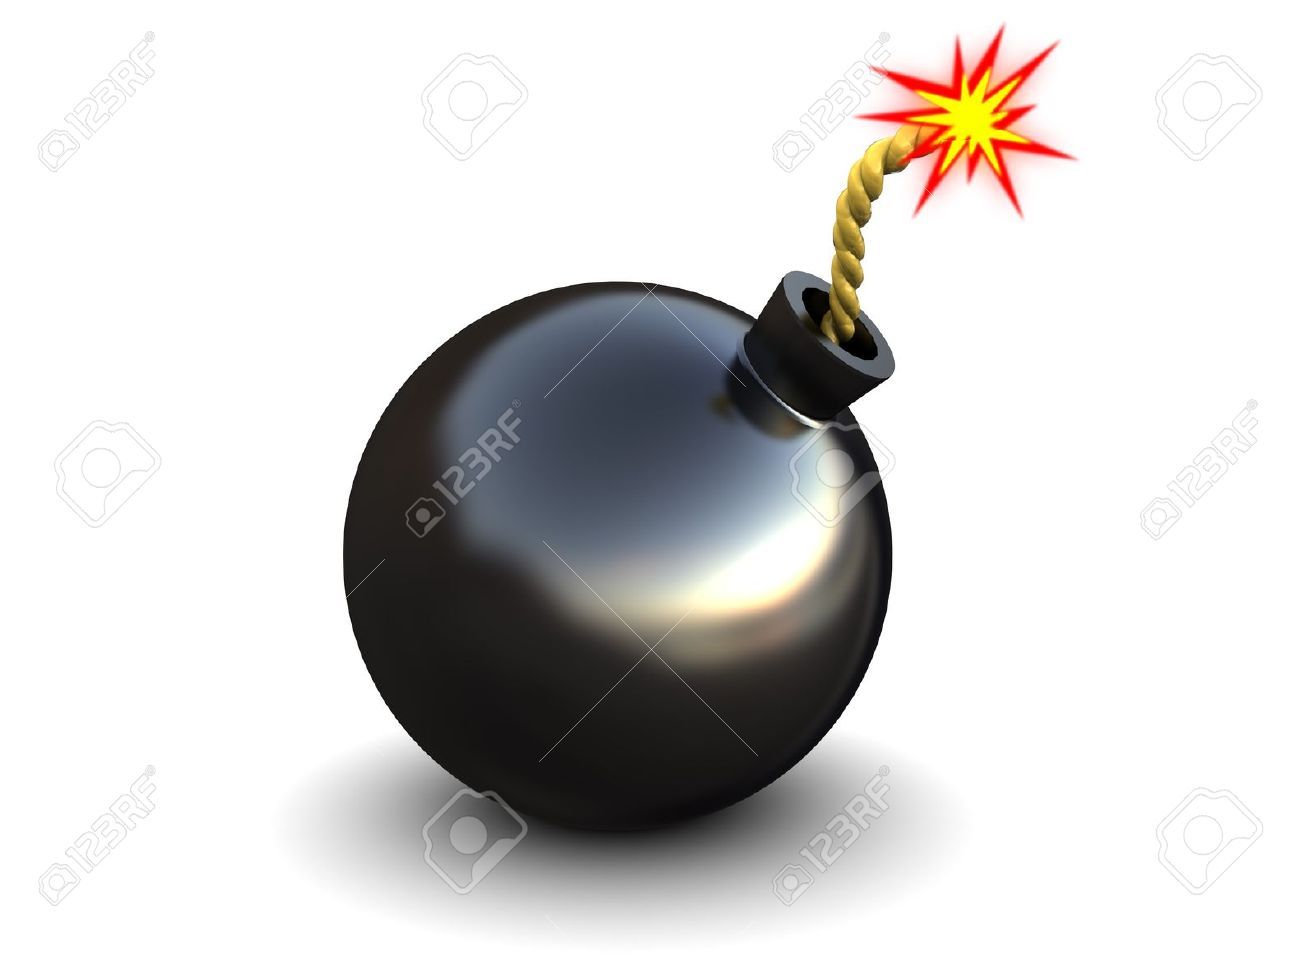 7550577-abstract-3d-illustration-of-bomb-with-fire-over-white-background-Stock-Illustration.jpg